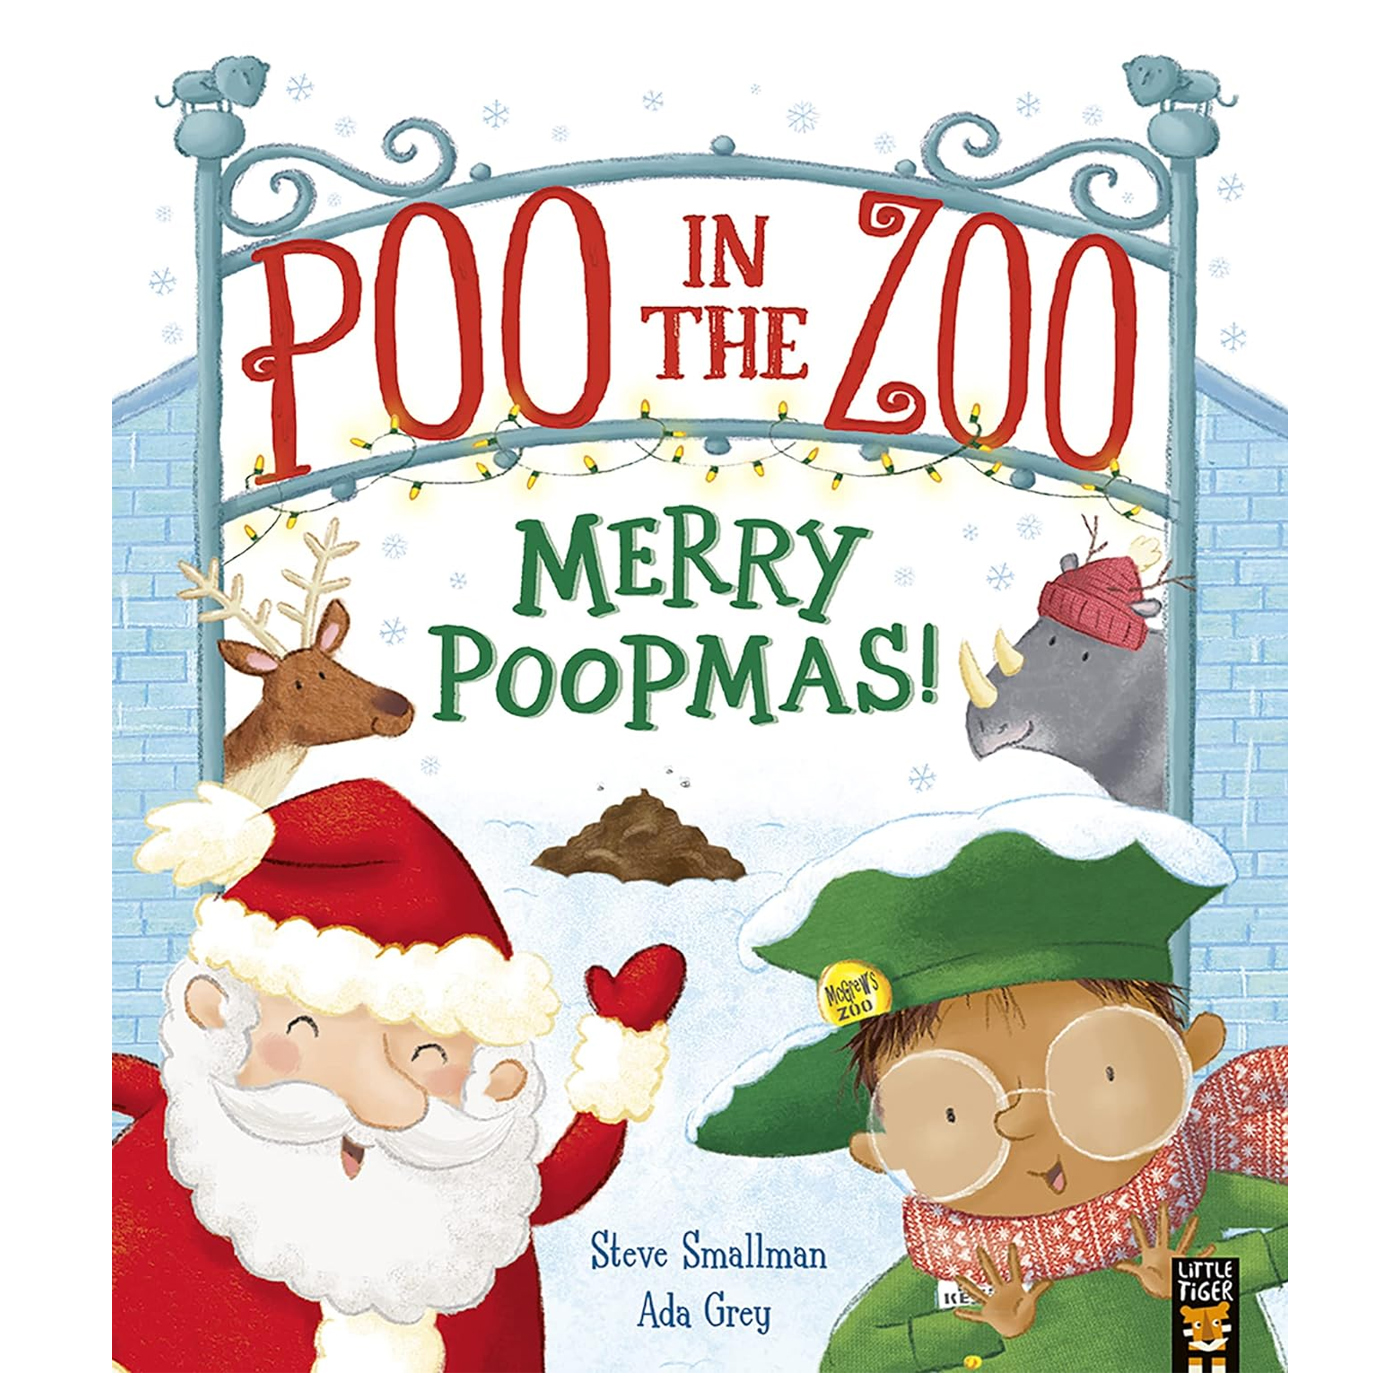 LITTLE TIGER Poo in the Zoo: Merry Poopmas!